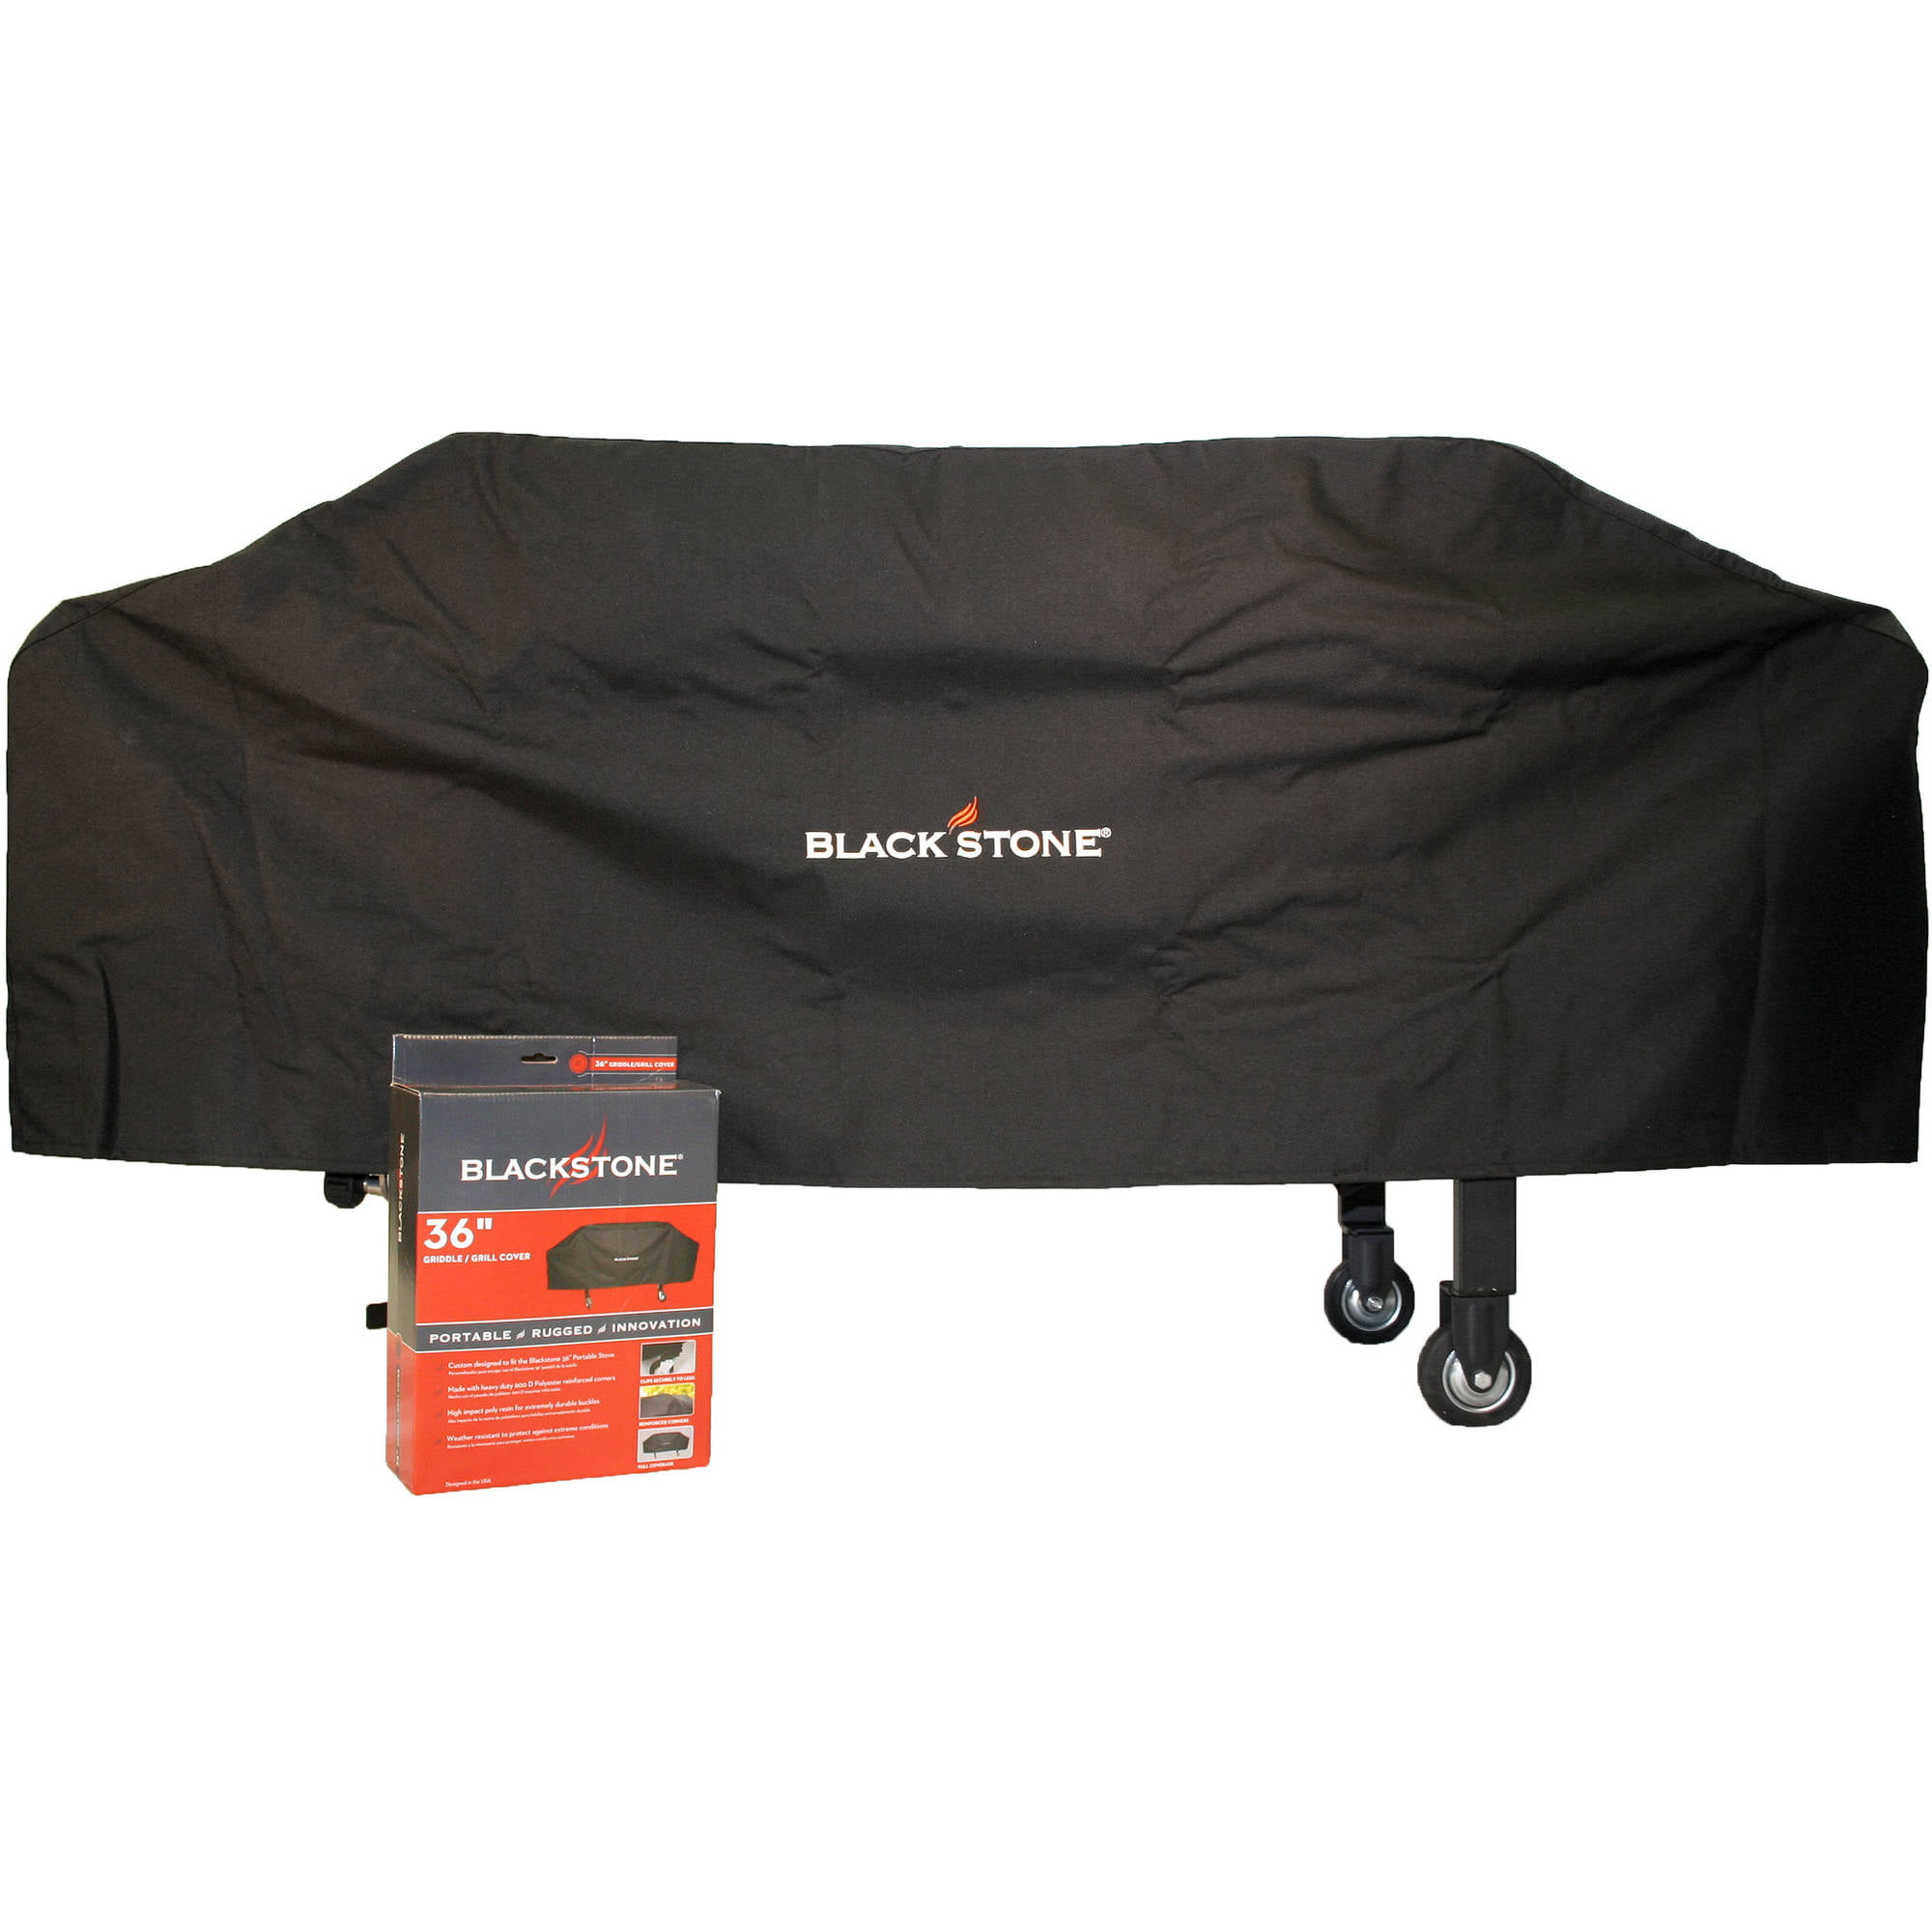 Blackstone BBQ Griddle Grill Polyester Cover 36 in Black Water UV Resistent 